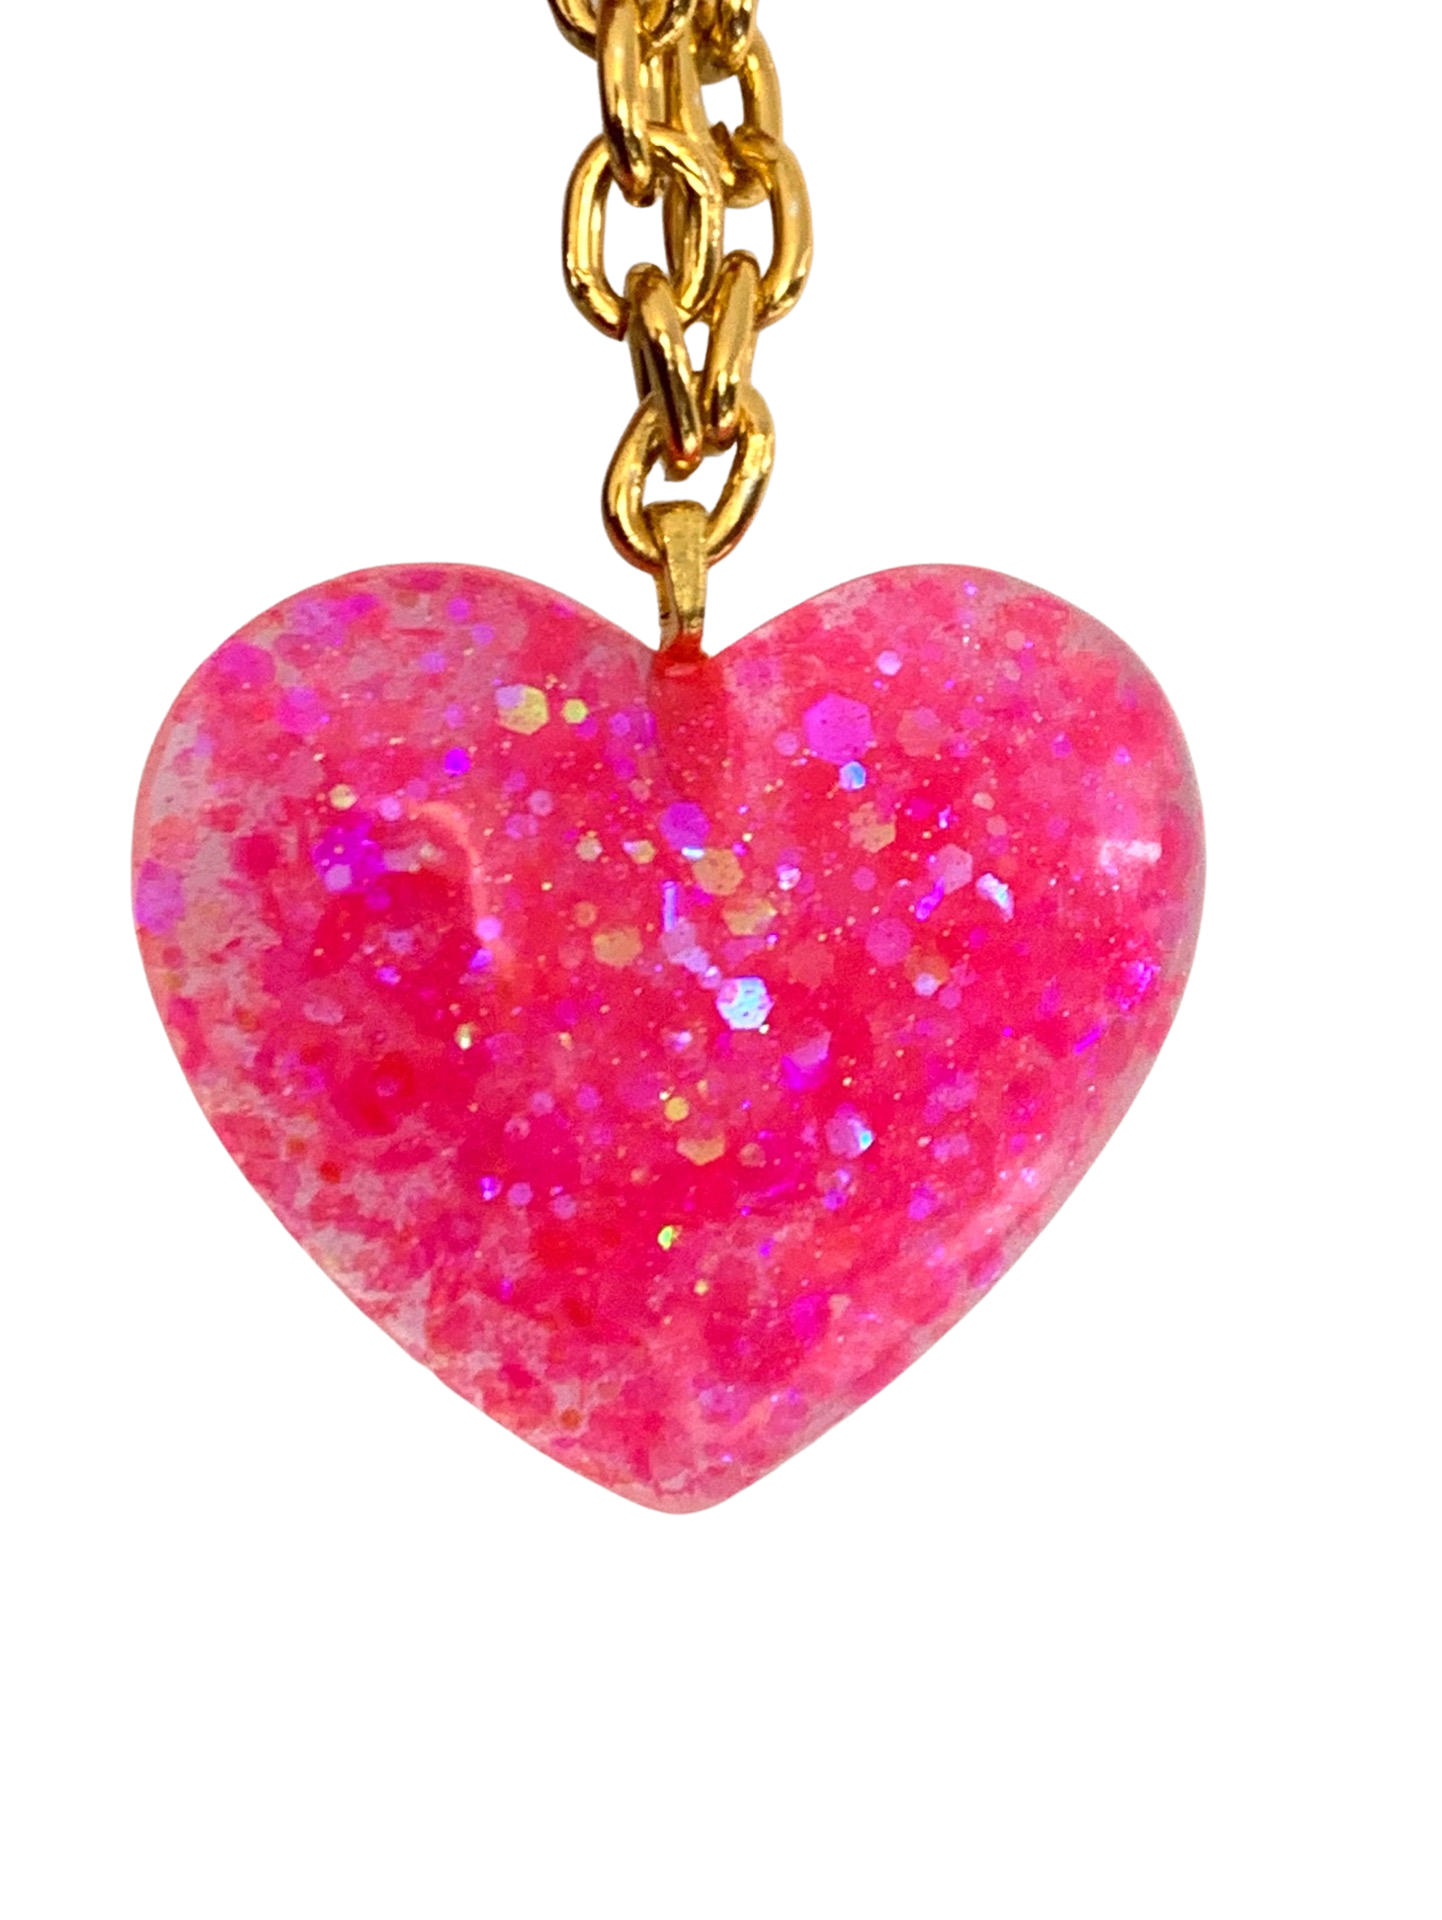 Big Pink Sparkly Heart Pendant on Lightweight Gold or Silver Chain